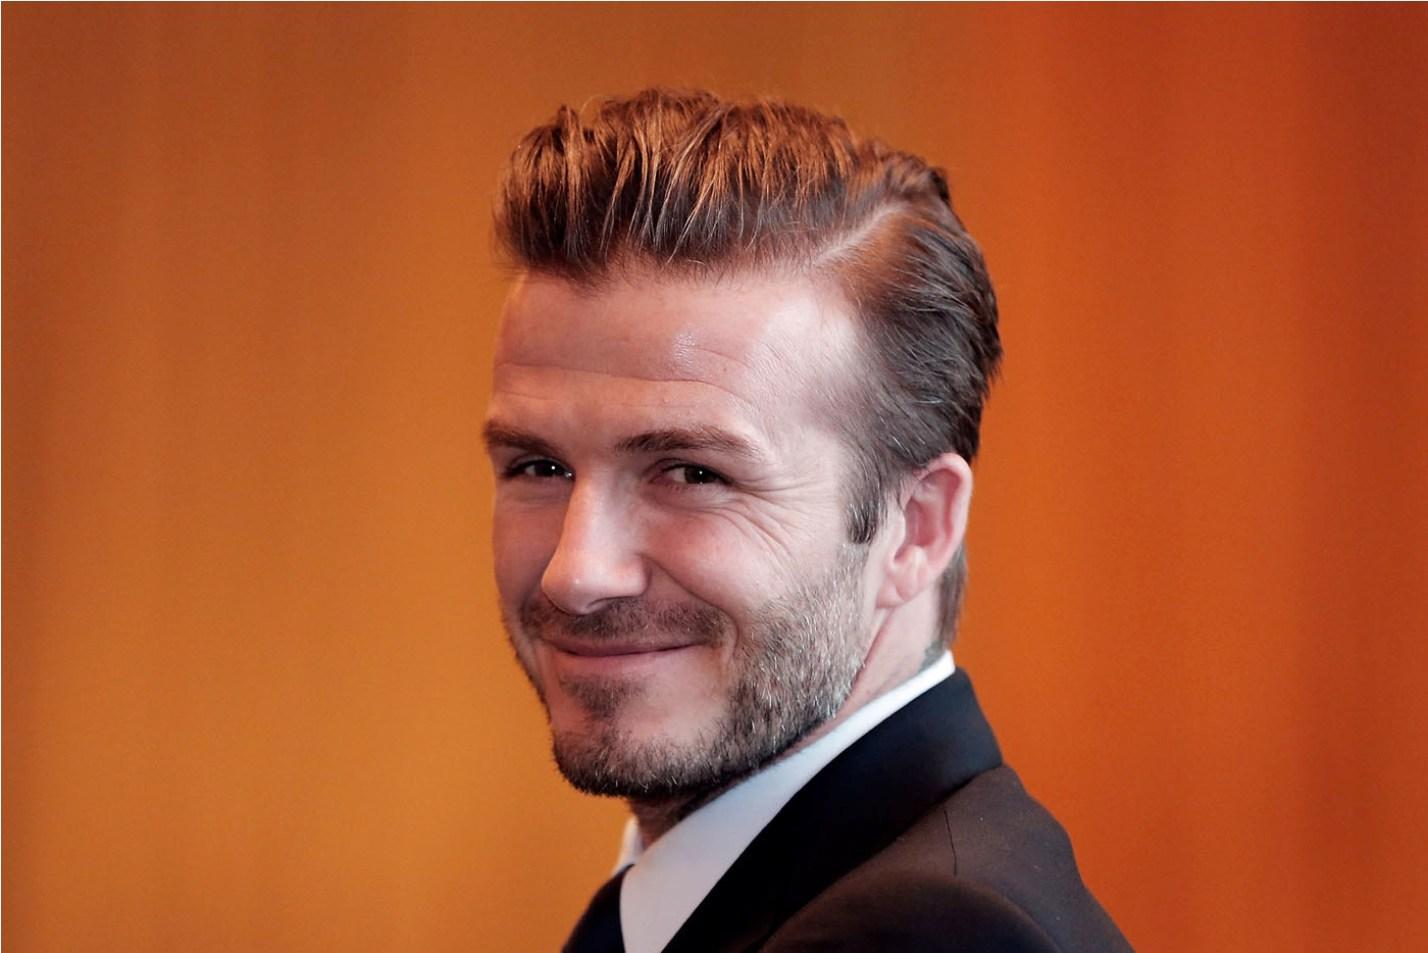 David Beckham Hairstyle Wallpaper Image Photo Picture Background